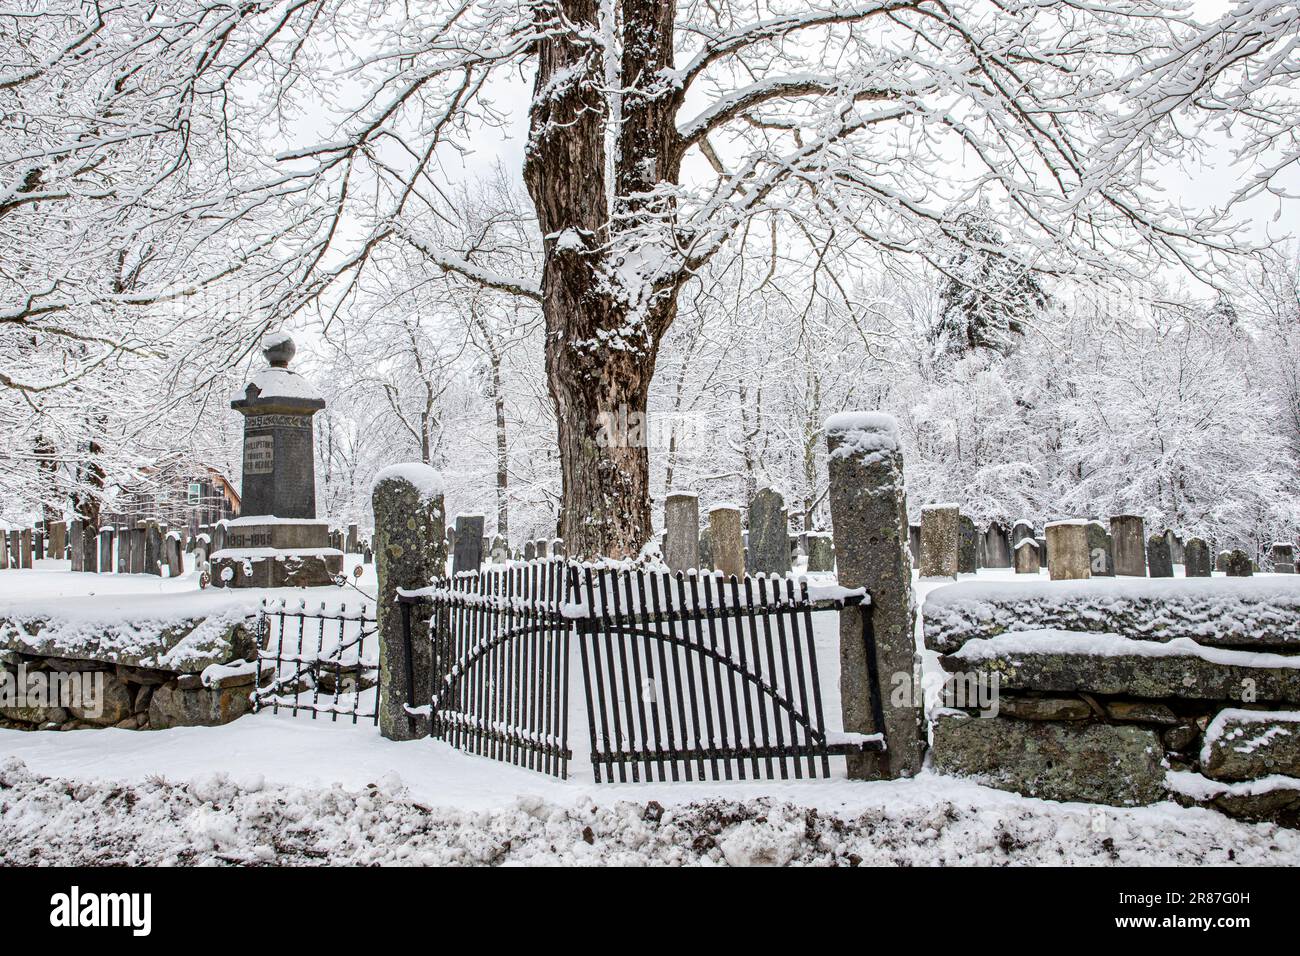 The Upper Cemetery in Phillipston, MA after a snow storm Stock Photo